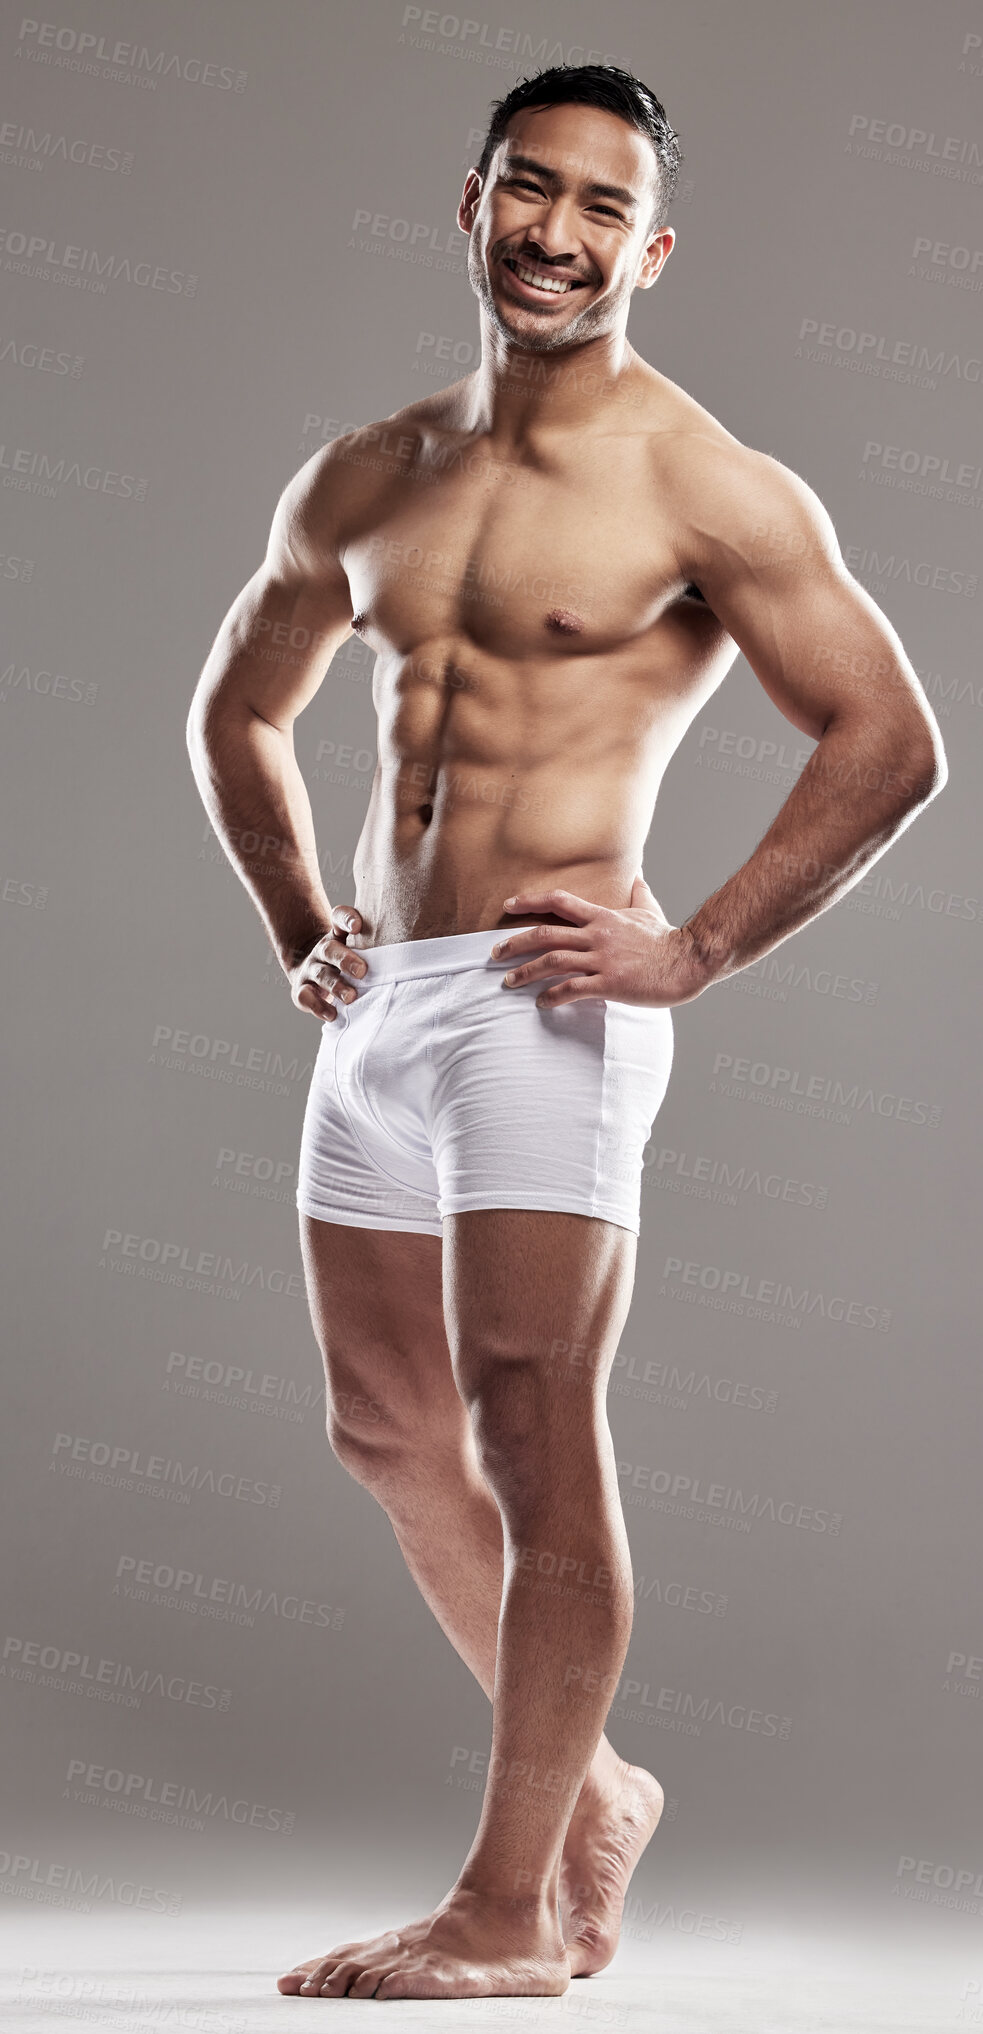 Buy stock photo Studio portrait of a muscular young man posing against a grey background